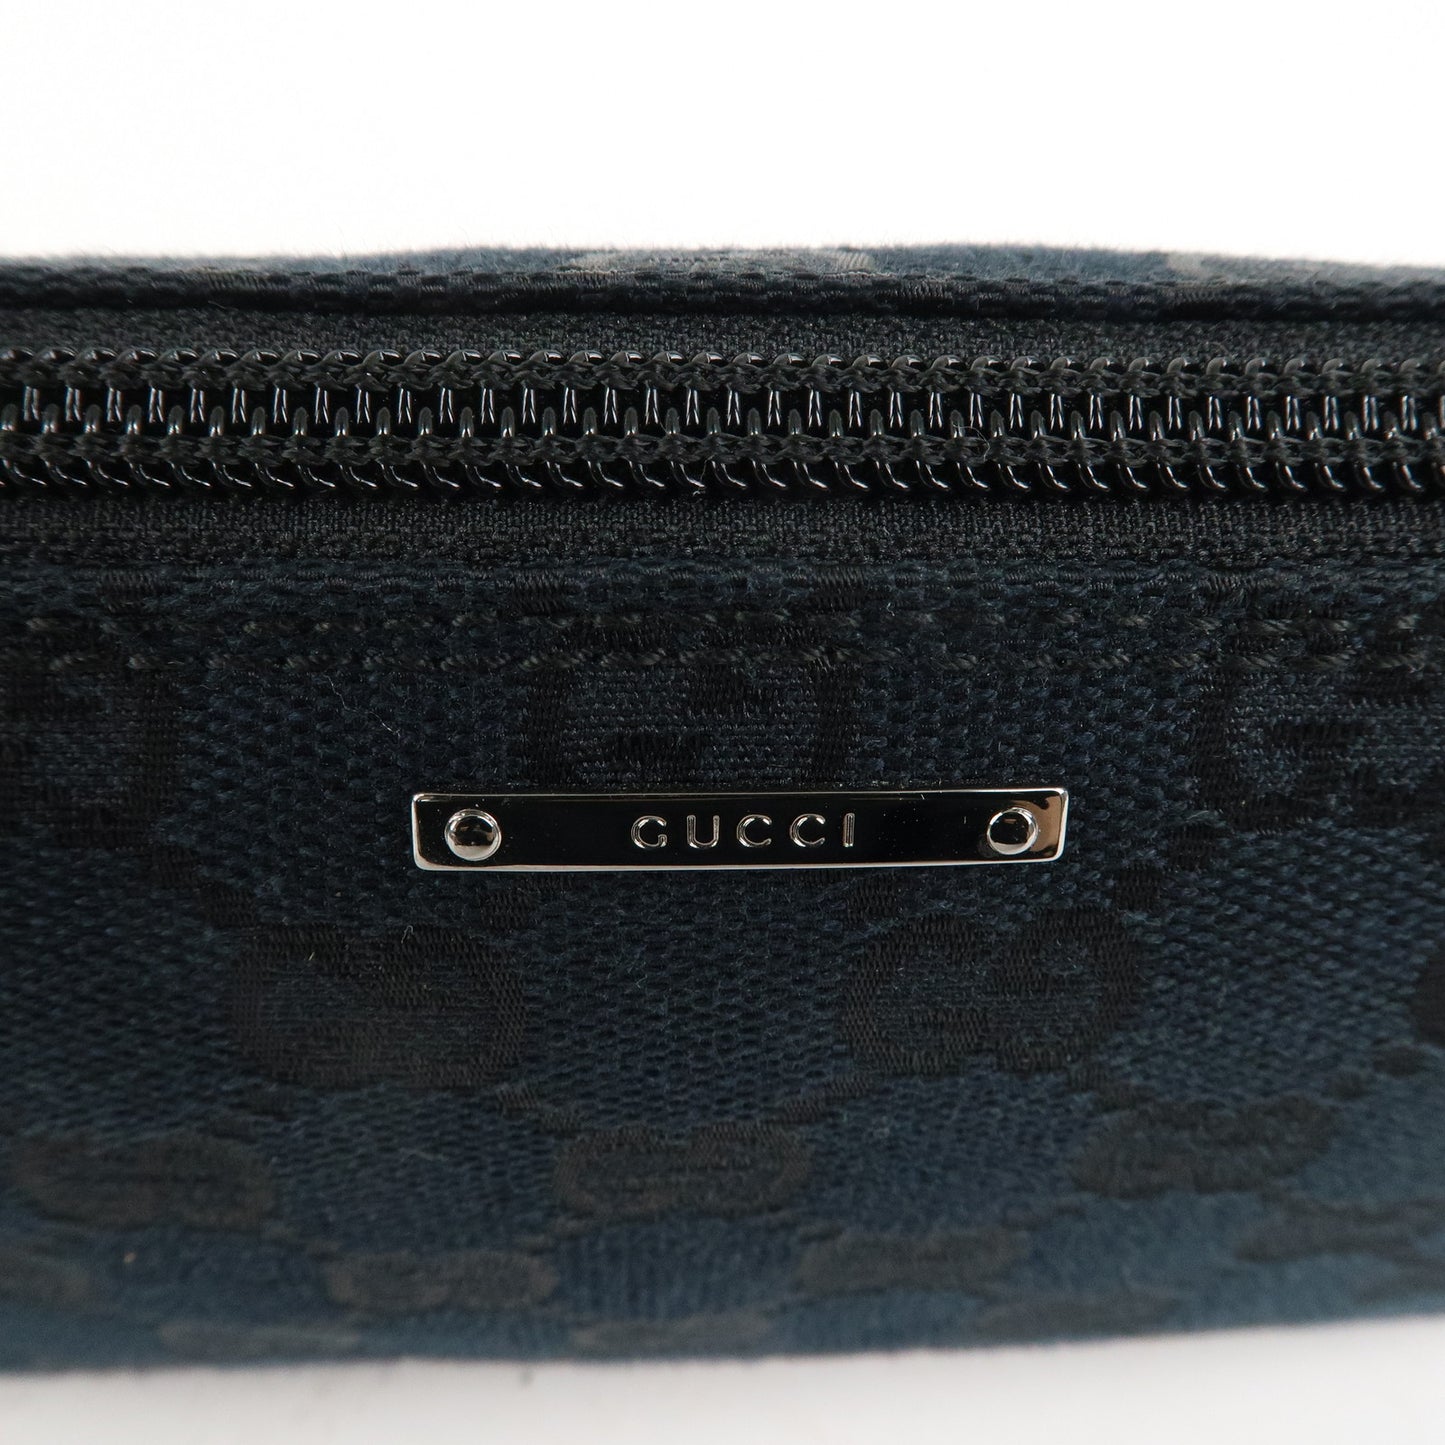 GUCCI Boat Bag Sherry GG Canvas Leather Pouch Black 141809